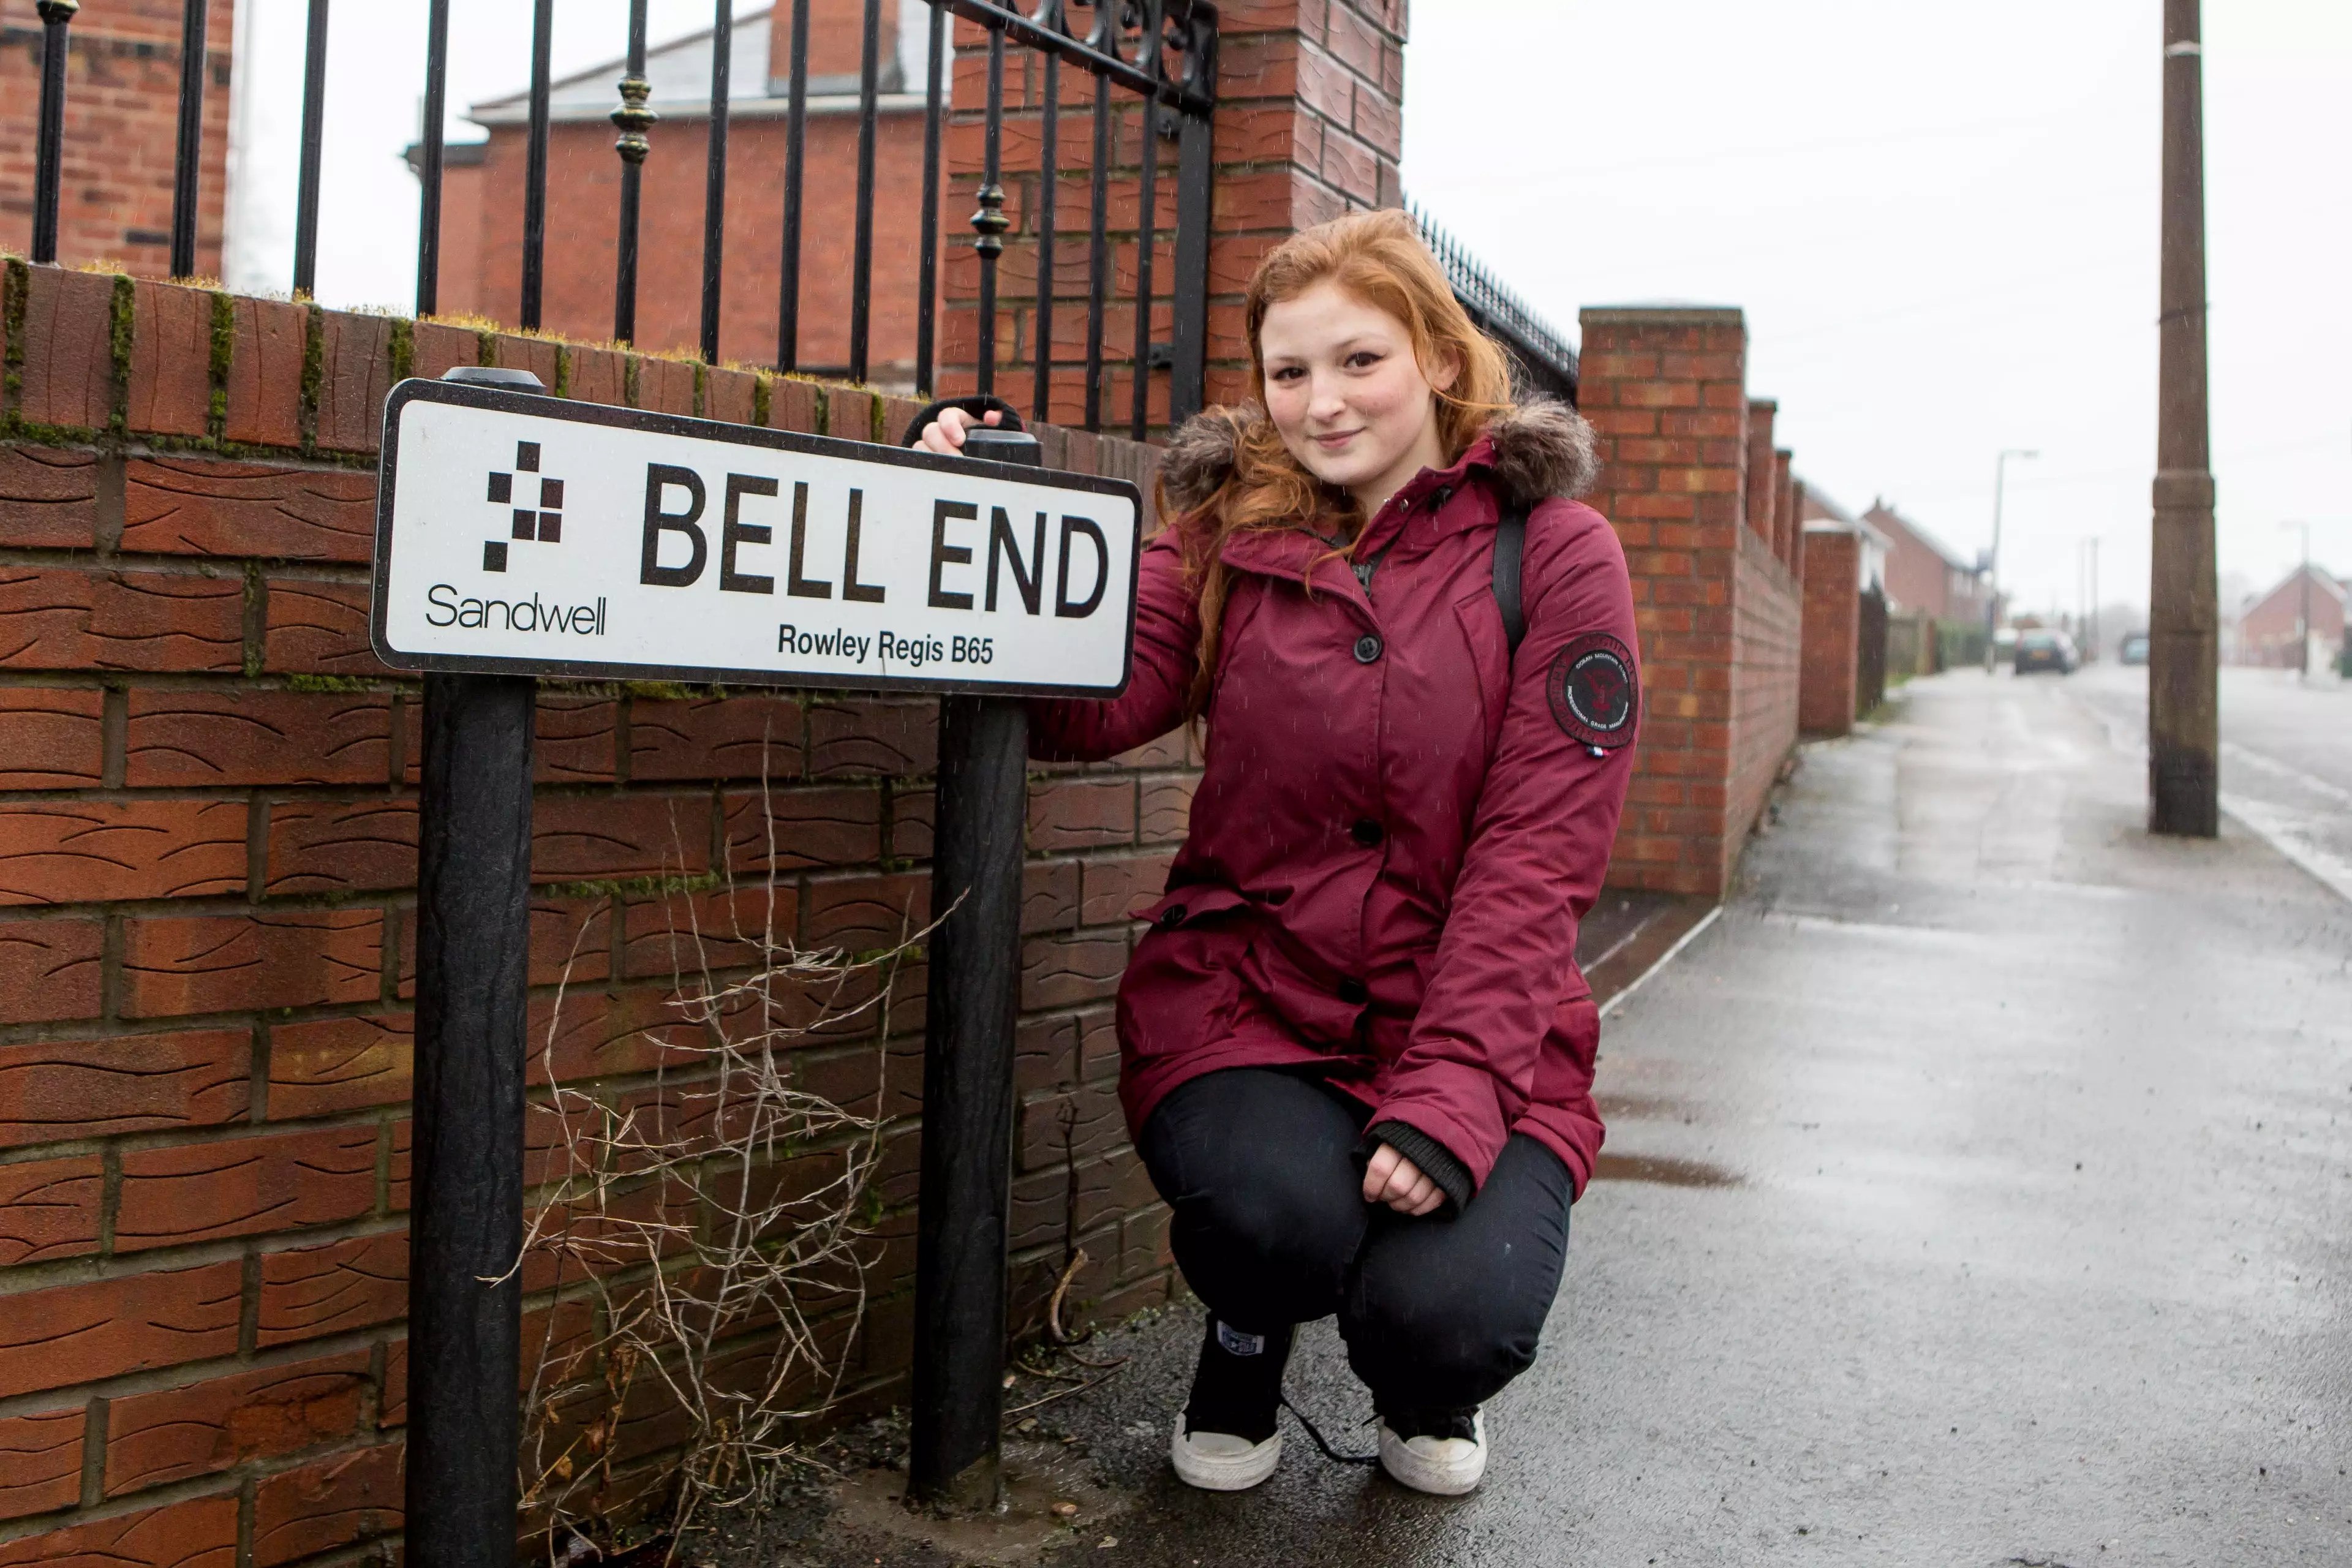 Bell End Residents Win Fight To Save Street Name